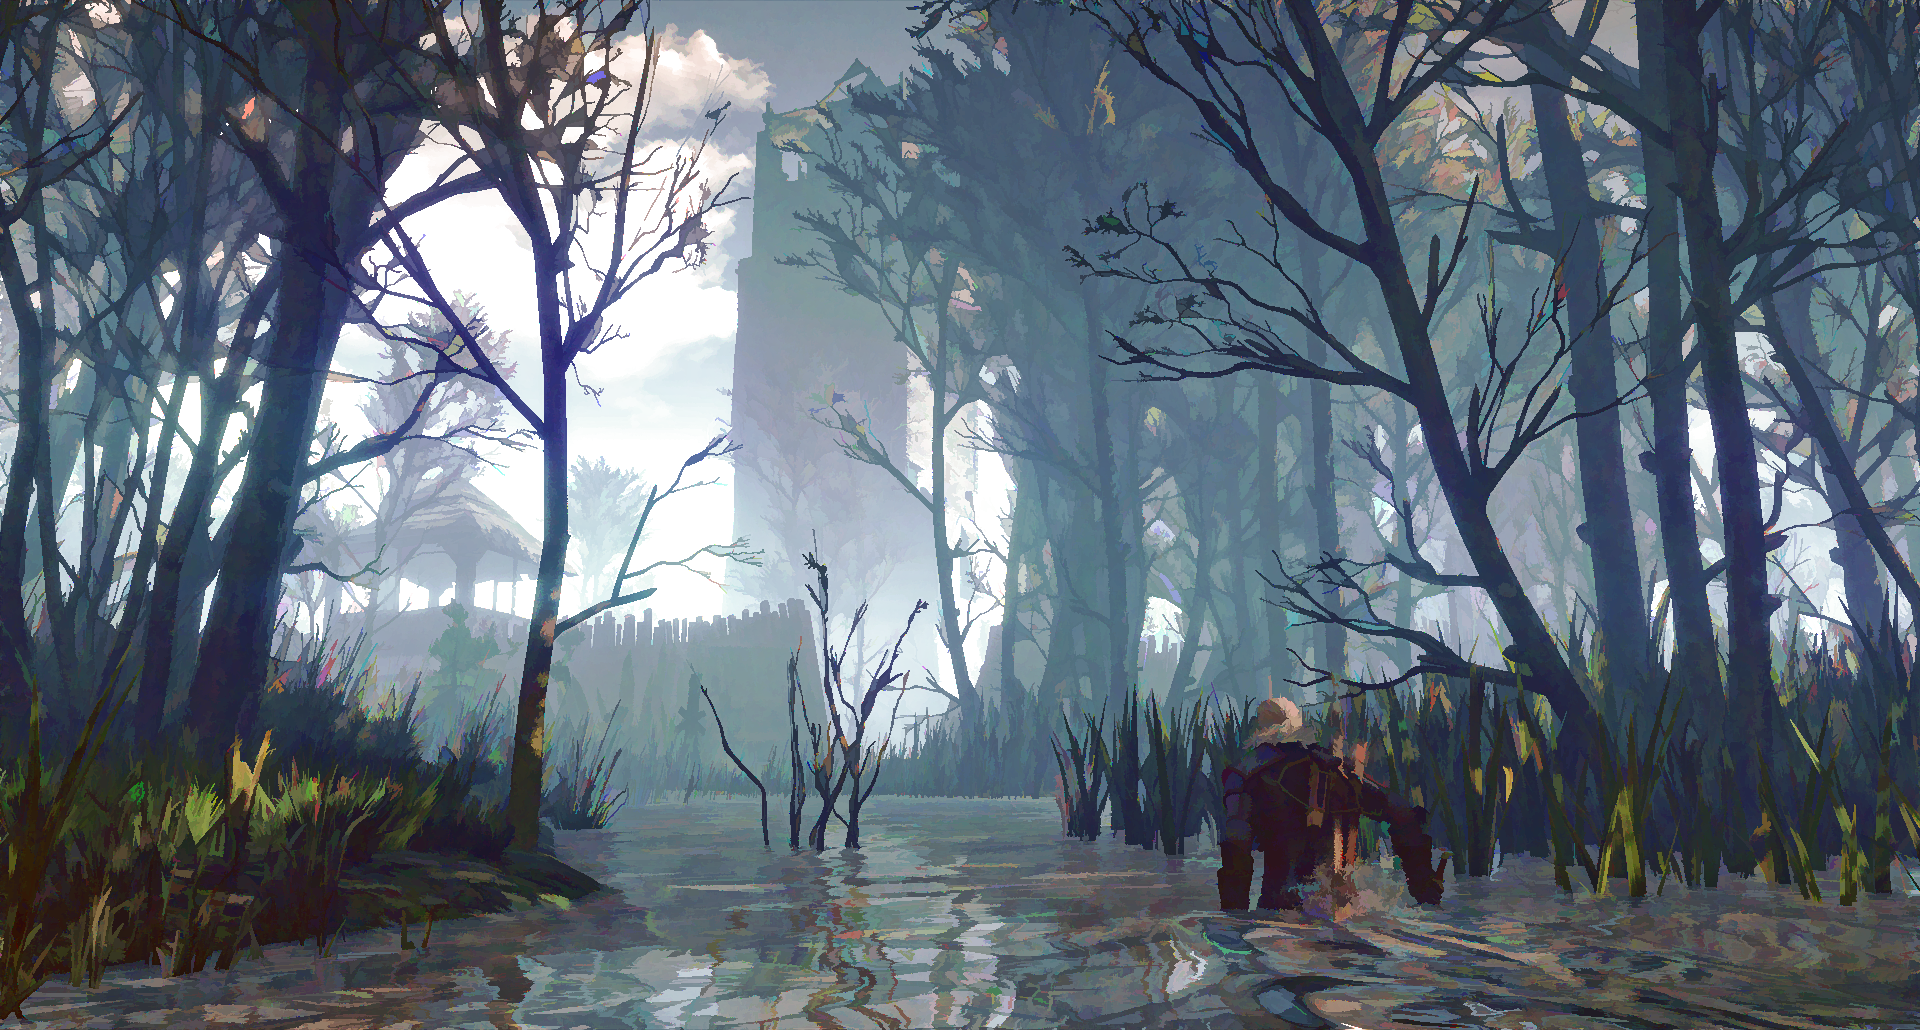 General 1920x1030 The Witcher 3: Wild Hunt video games painting digital art swamp trees PC gaming RPG